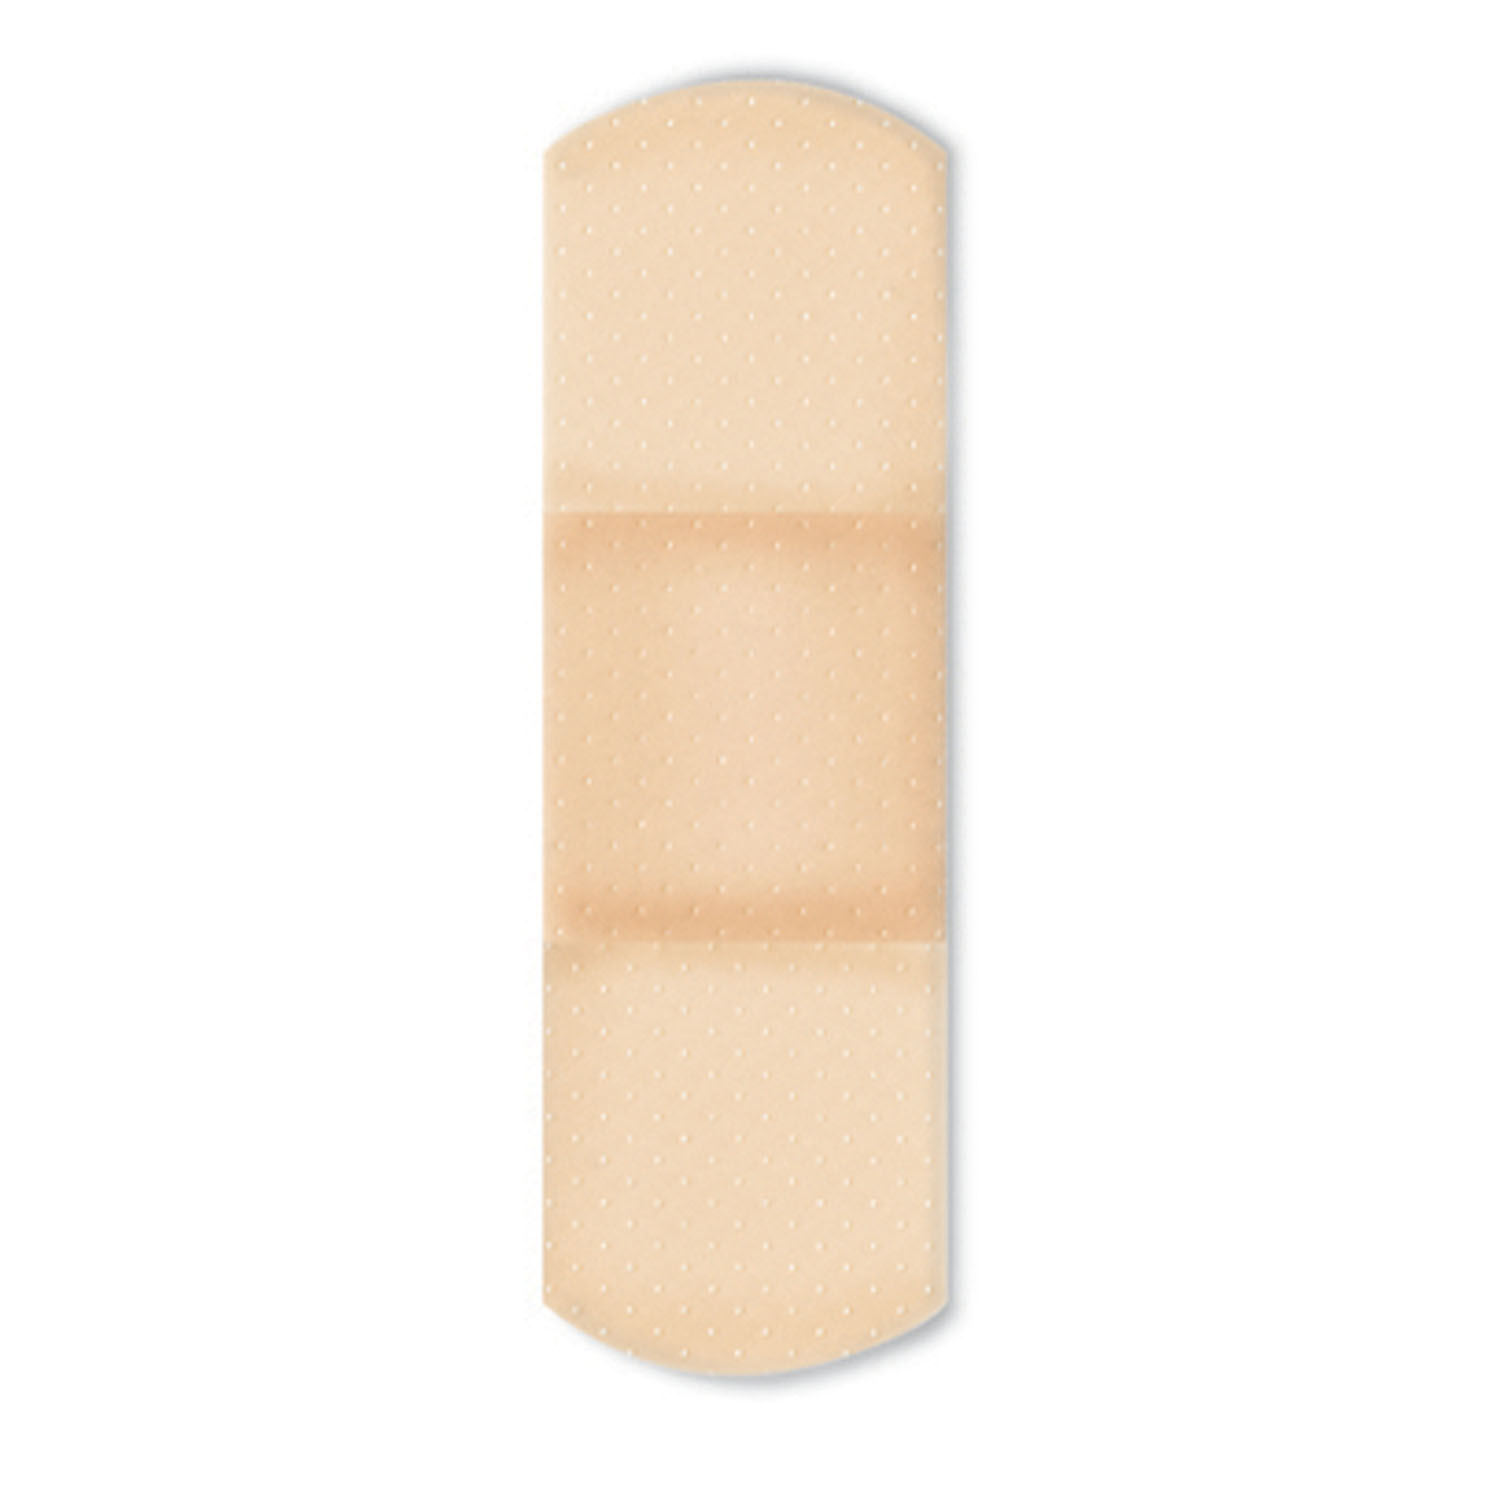 DUKAL FIRST AID SHEER ADHESIVE BANDAGES : 1290033 BX                       $3.38 Stocked